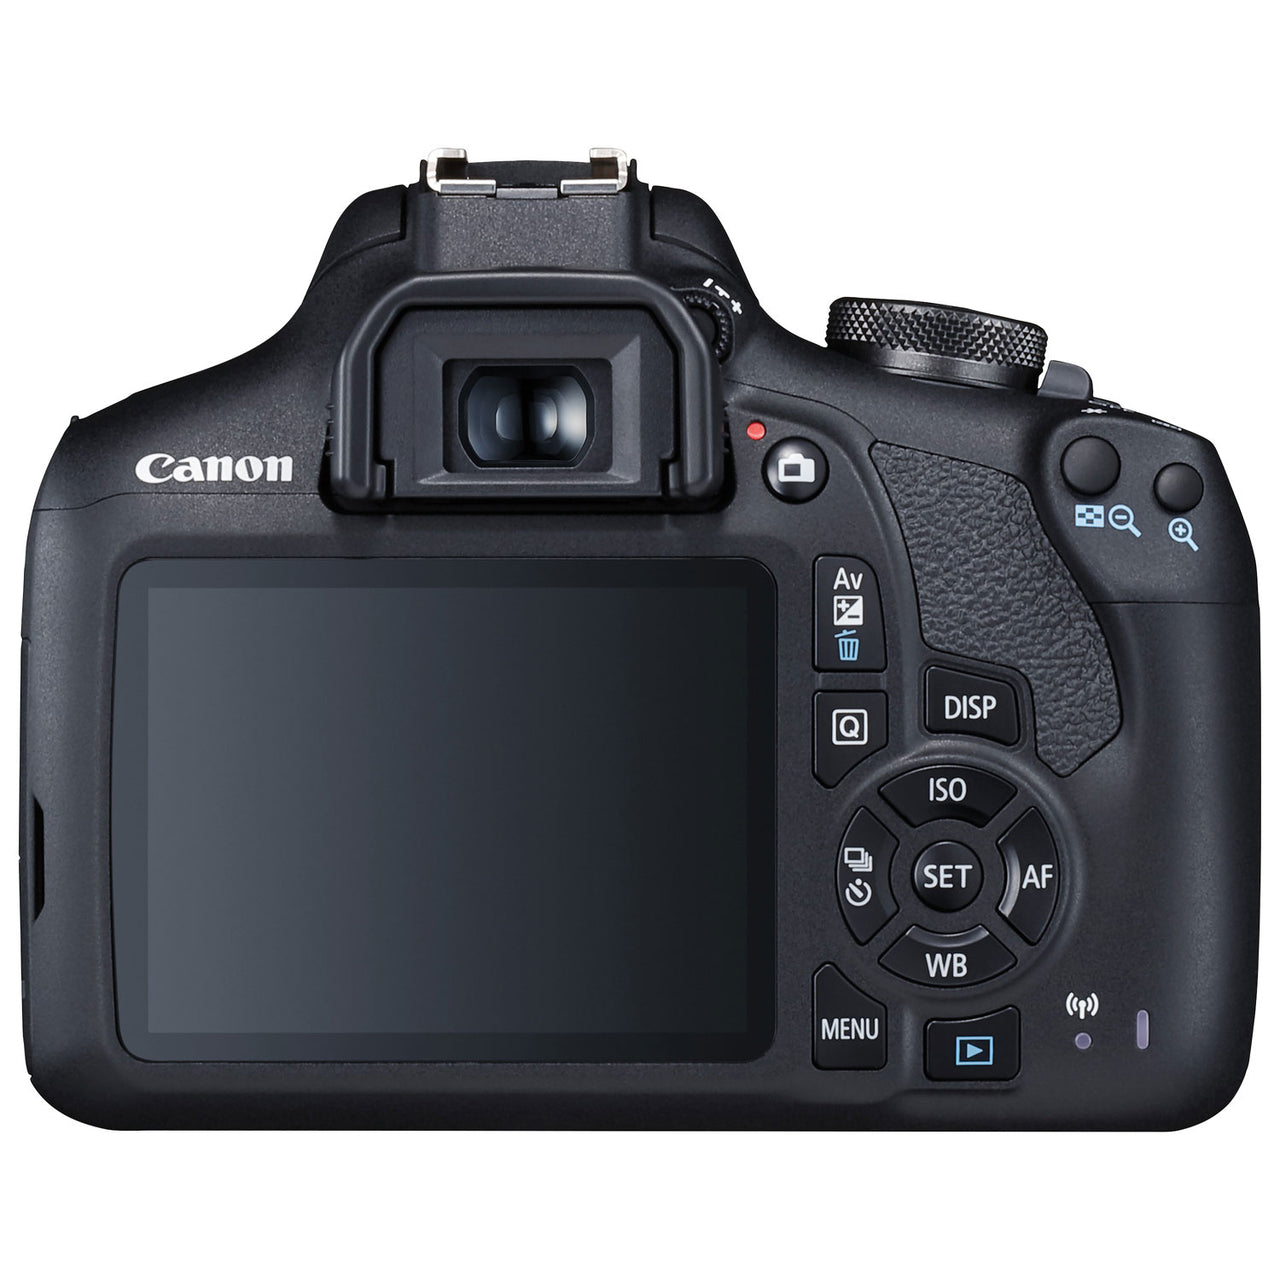 Canon EOS Rebel T7 DSLR Camera with 18-55mm Lens Kit